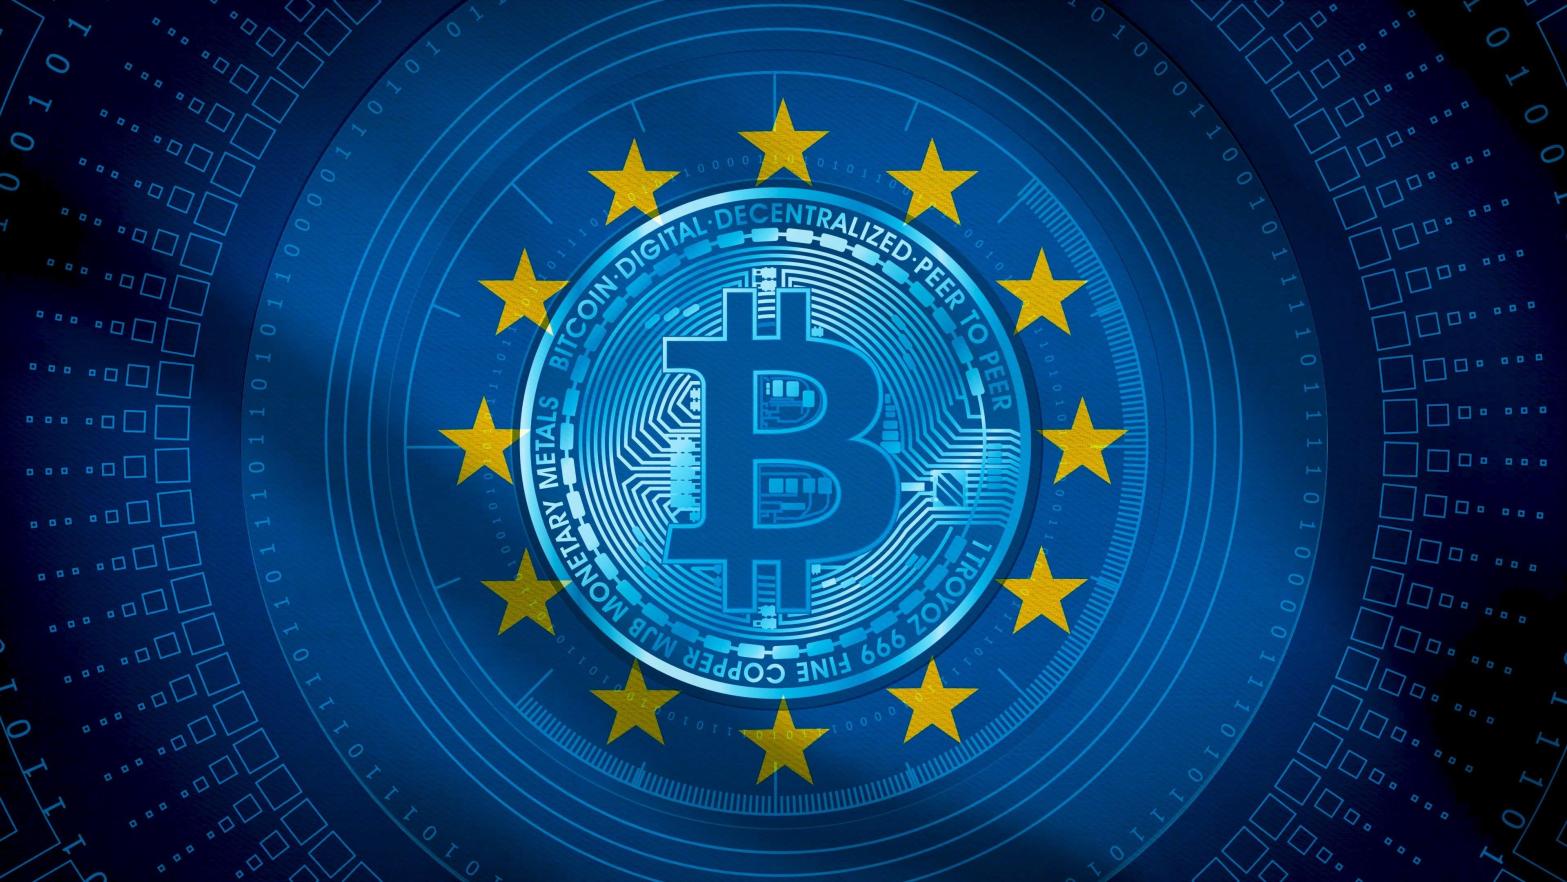 The European Central Bank came out with a scathing review against bitcoin, and by extension crypto in general. (Graphic: Craig Hastings, Shutterstock)